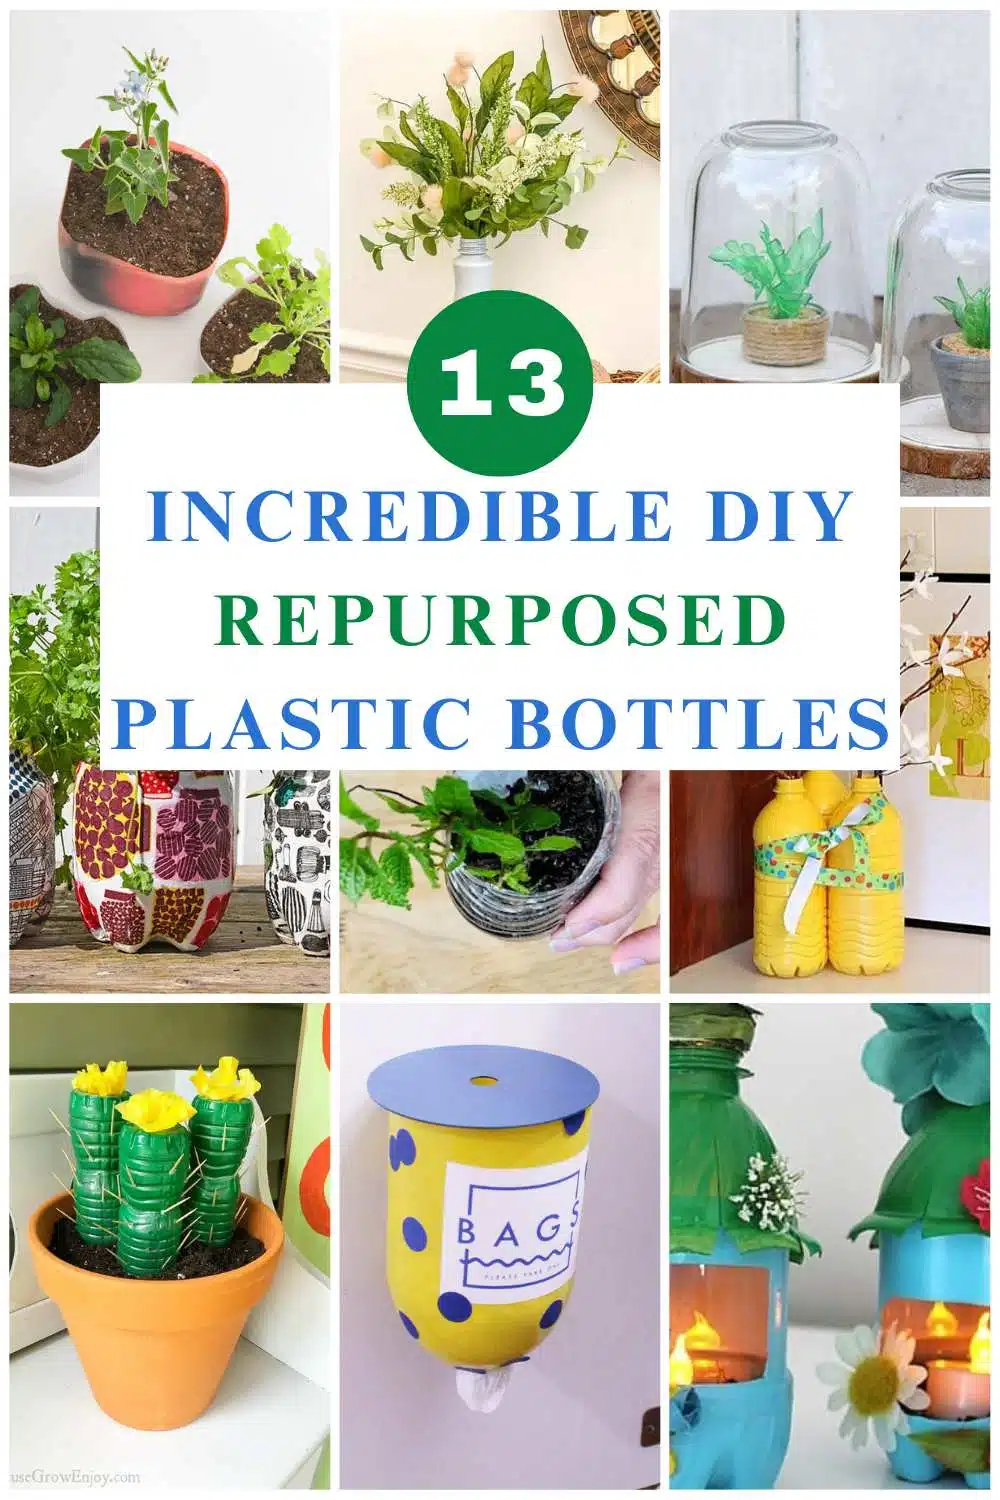 13 Ways To Reuse And Repurpose Plastic Bottles